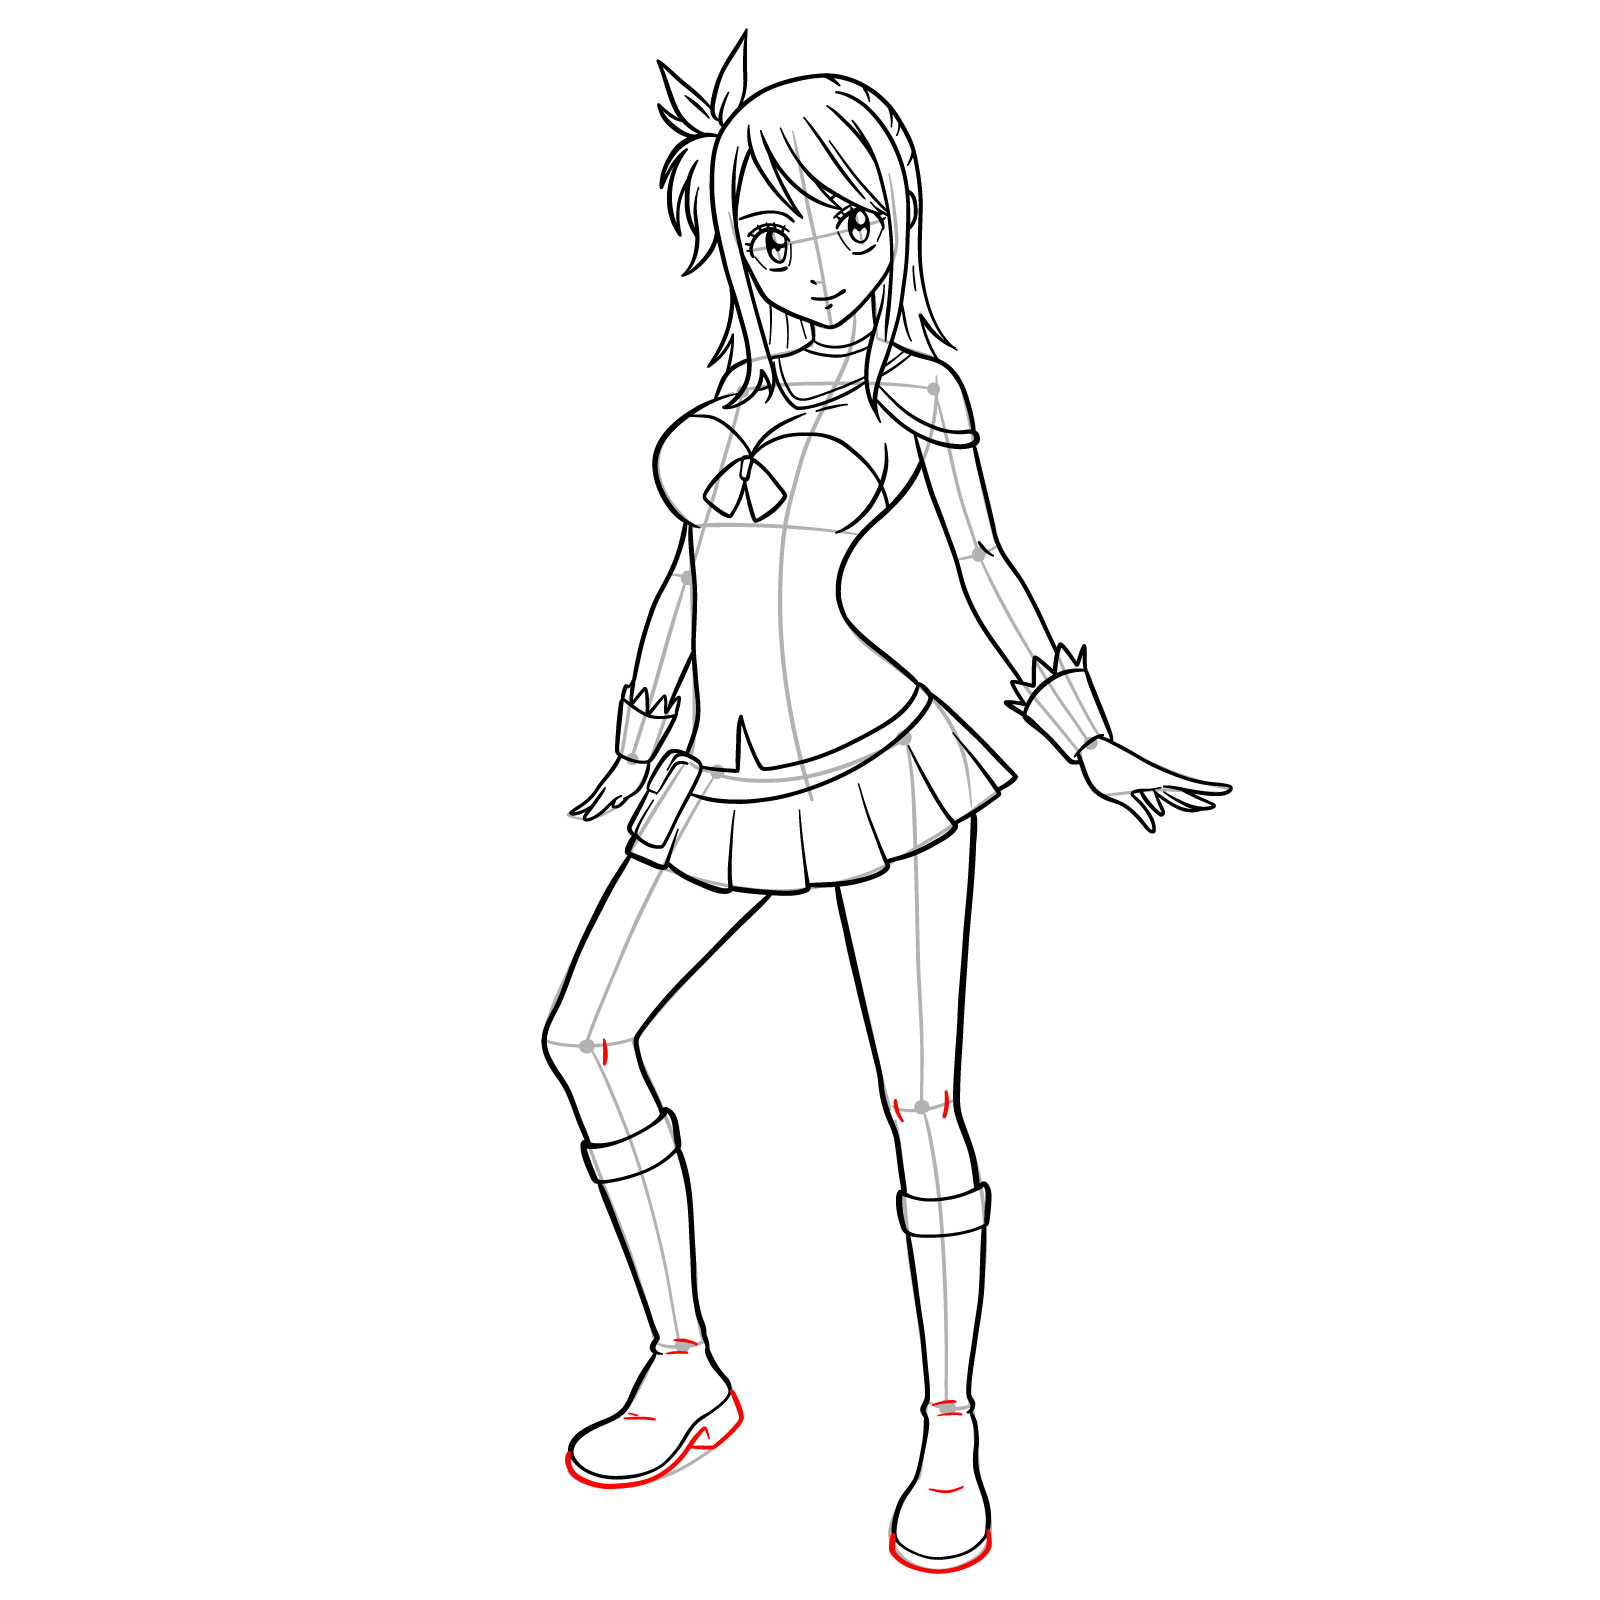 How to draw Lucy Heartfilia in a new outfit - step 29